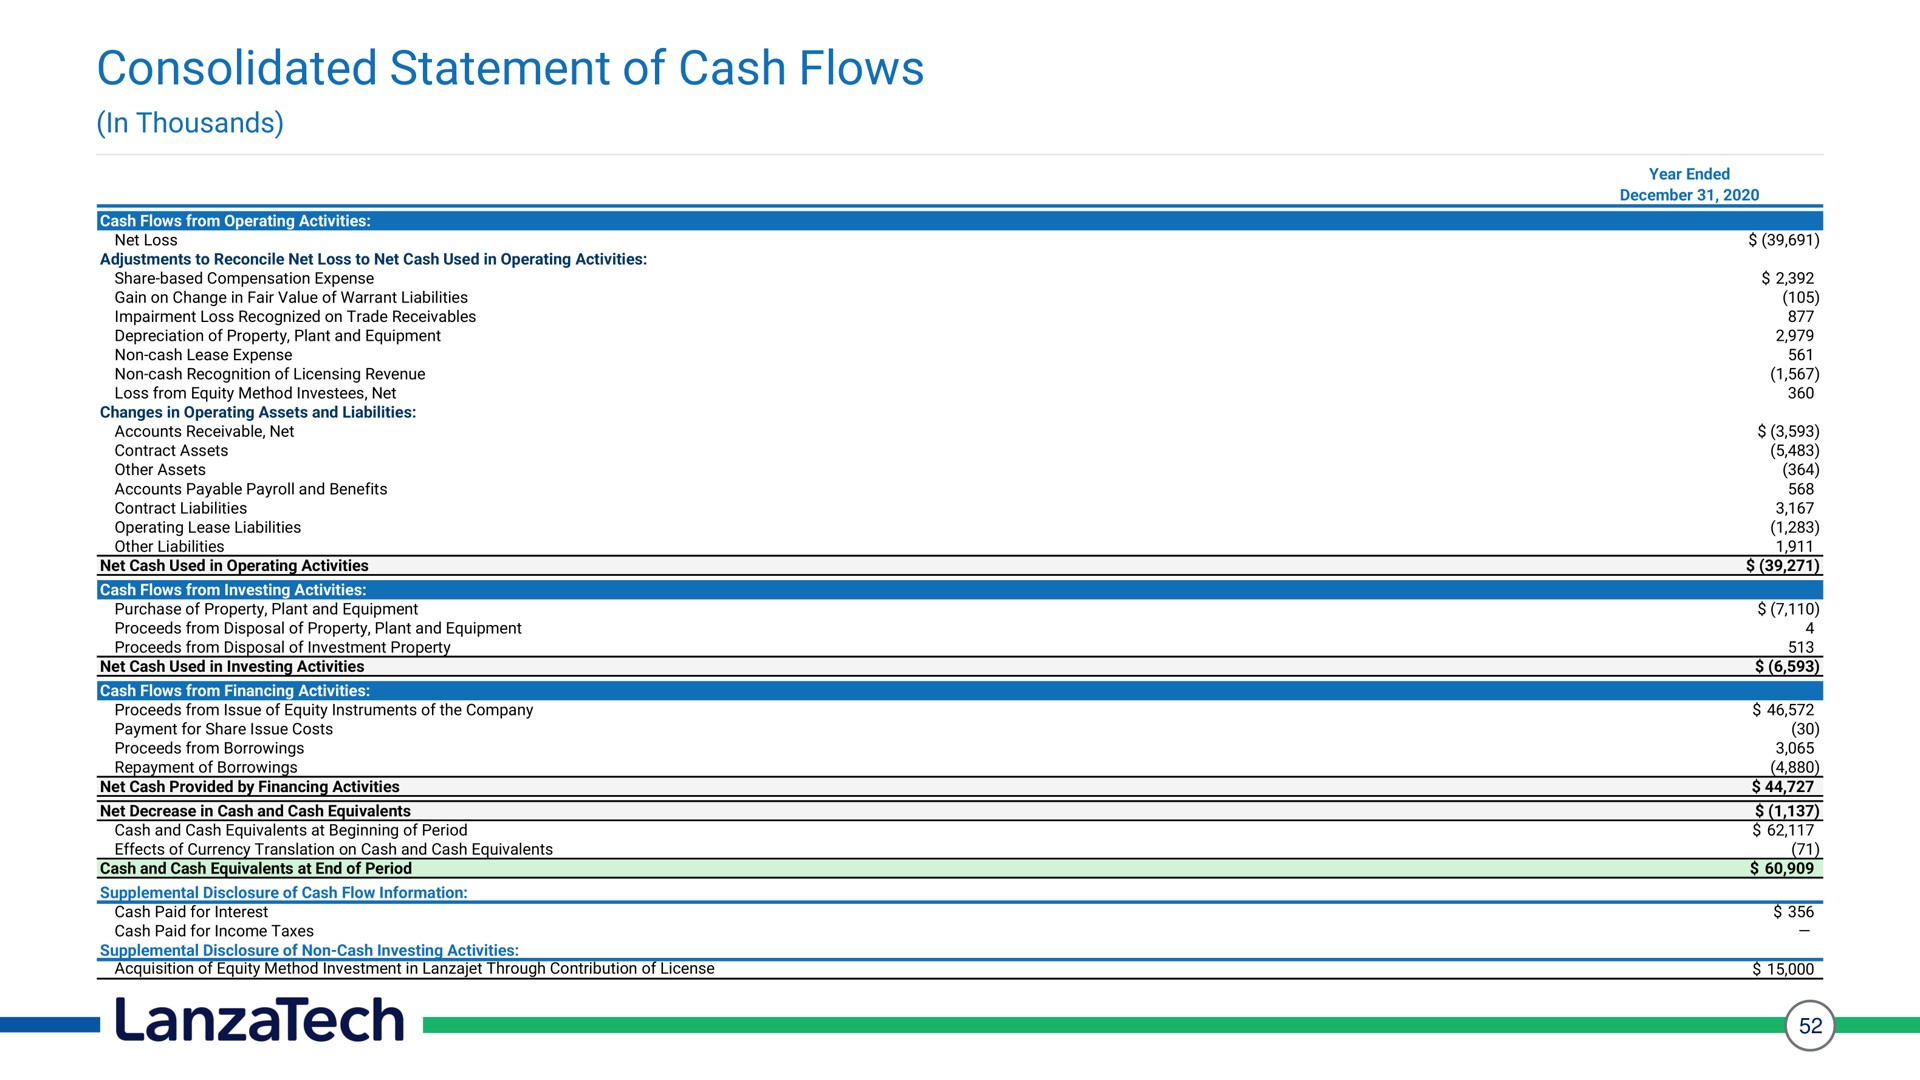 consolidated statement of cash flows | LanzaTech